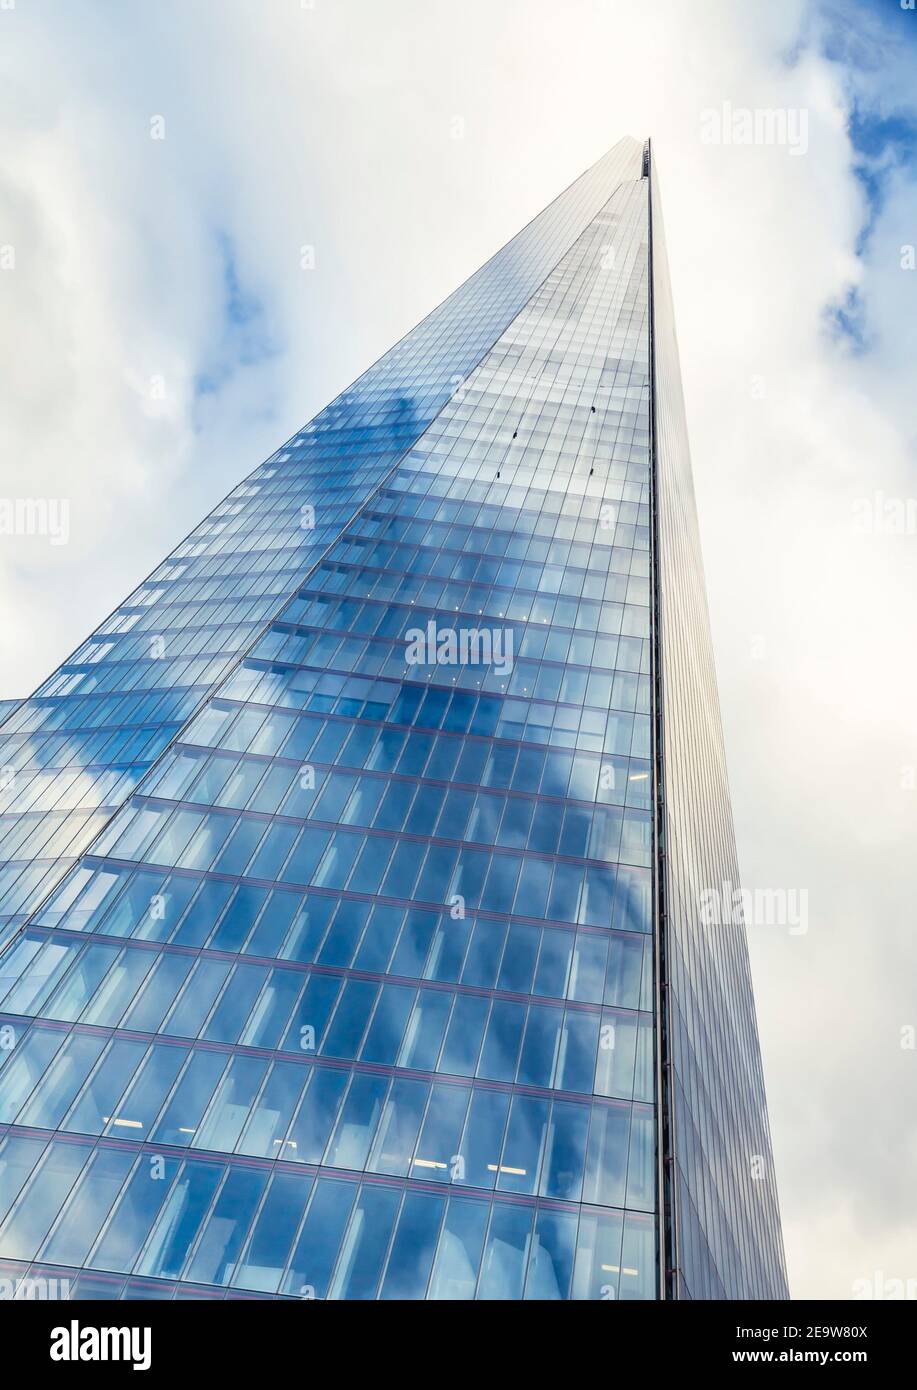 LONDON, UK - July 03, 2013. The Shard. Blue sky reflected on the glass exterior of a landmark skyscraper in central London, UK Stock Photo